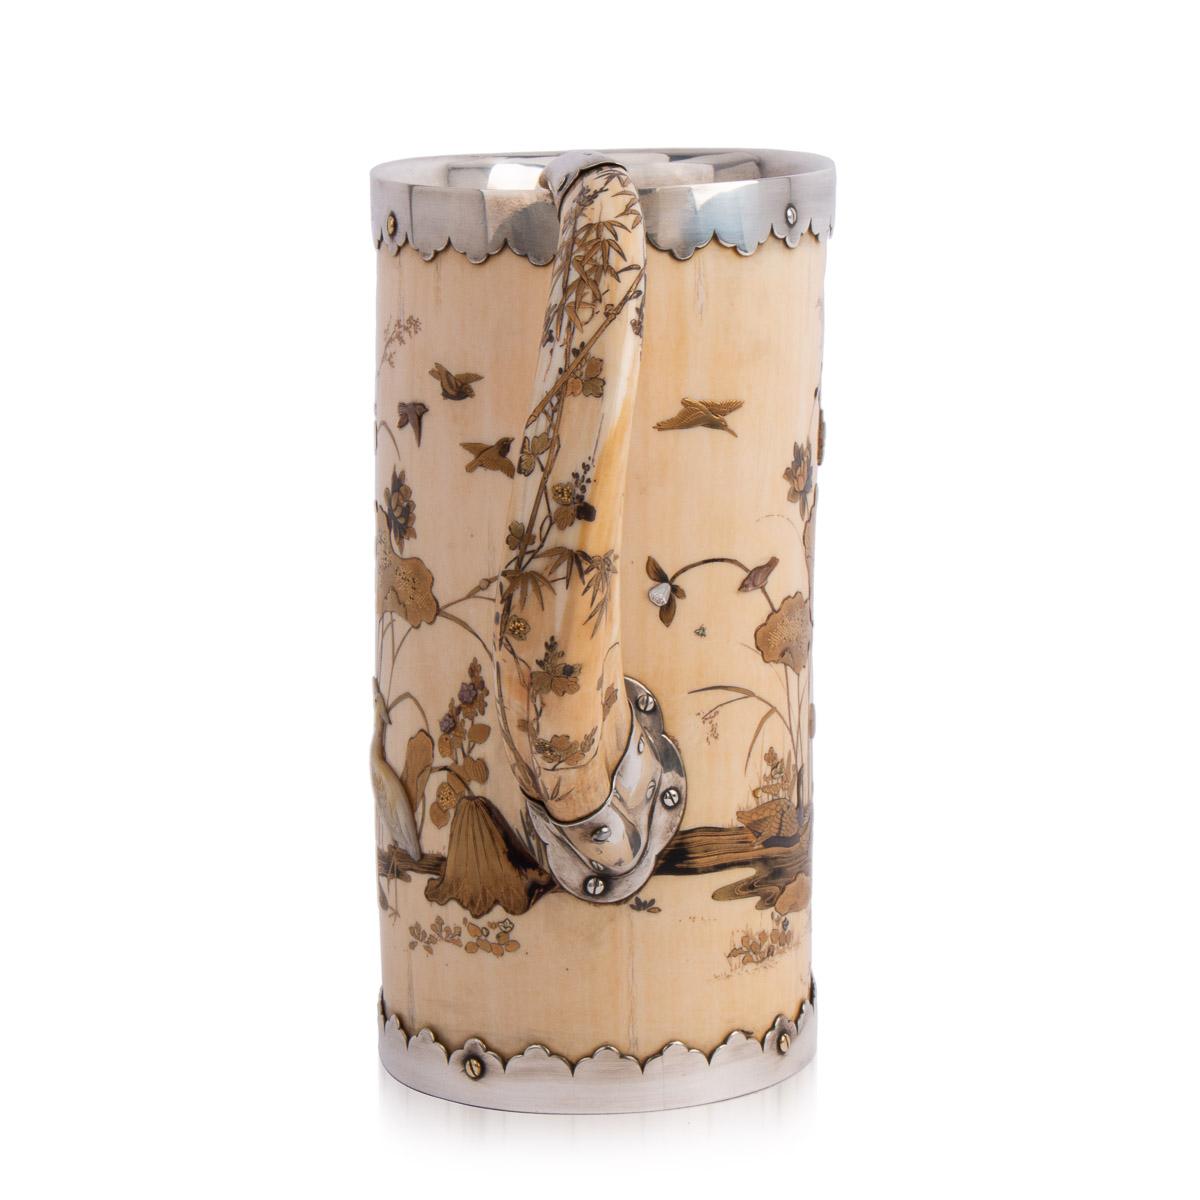 Antique 19th century Japanese Meiji period shibayama and silver mounted tankard, the tusk body decorated in gold lacquer, mother of pearl and hard stone with water fowl in a lotus pond, set with a clear glass bottom. Hallmarked English silver (925